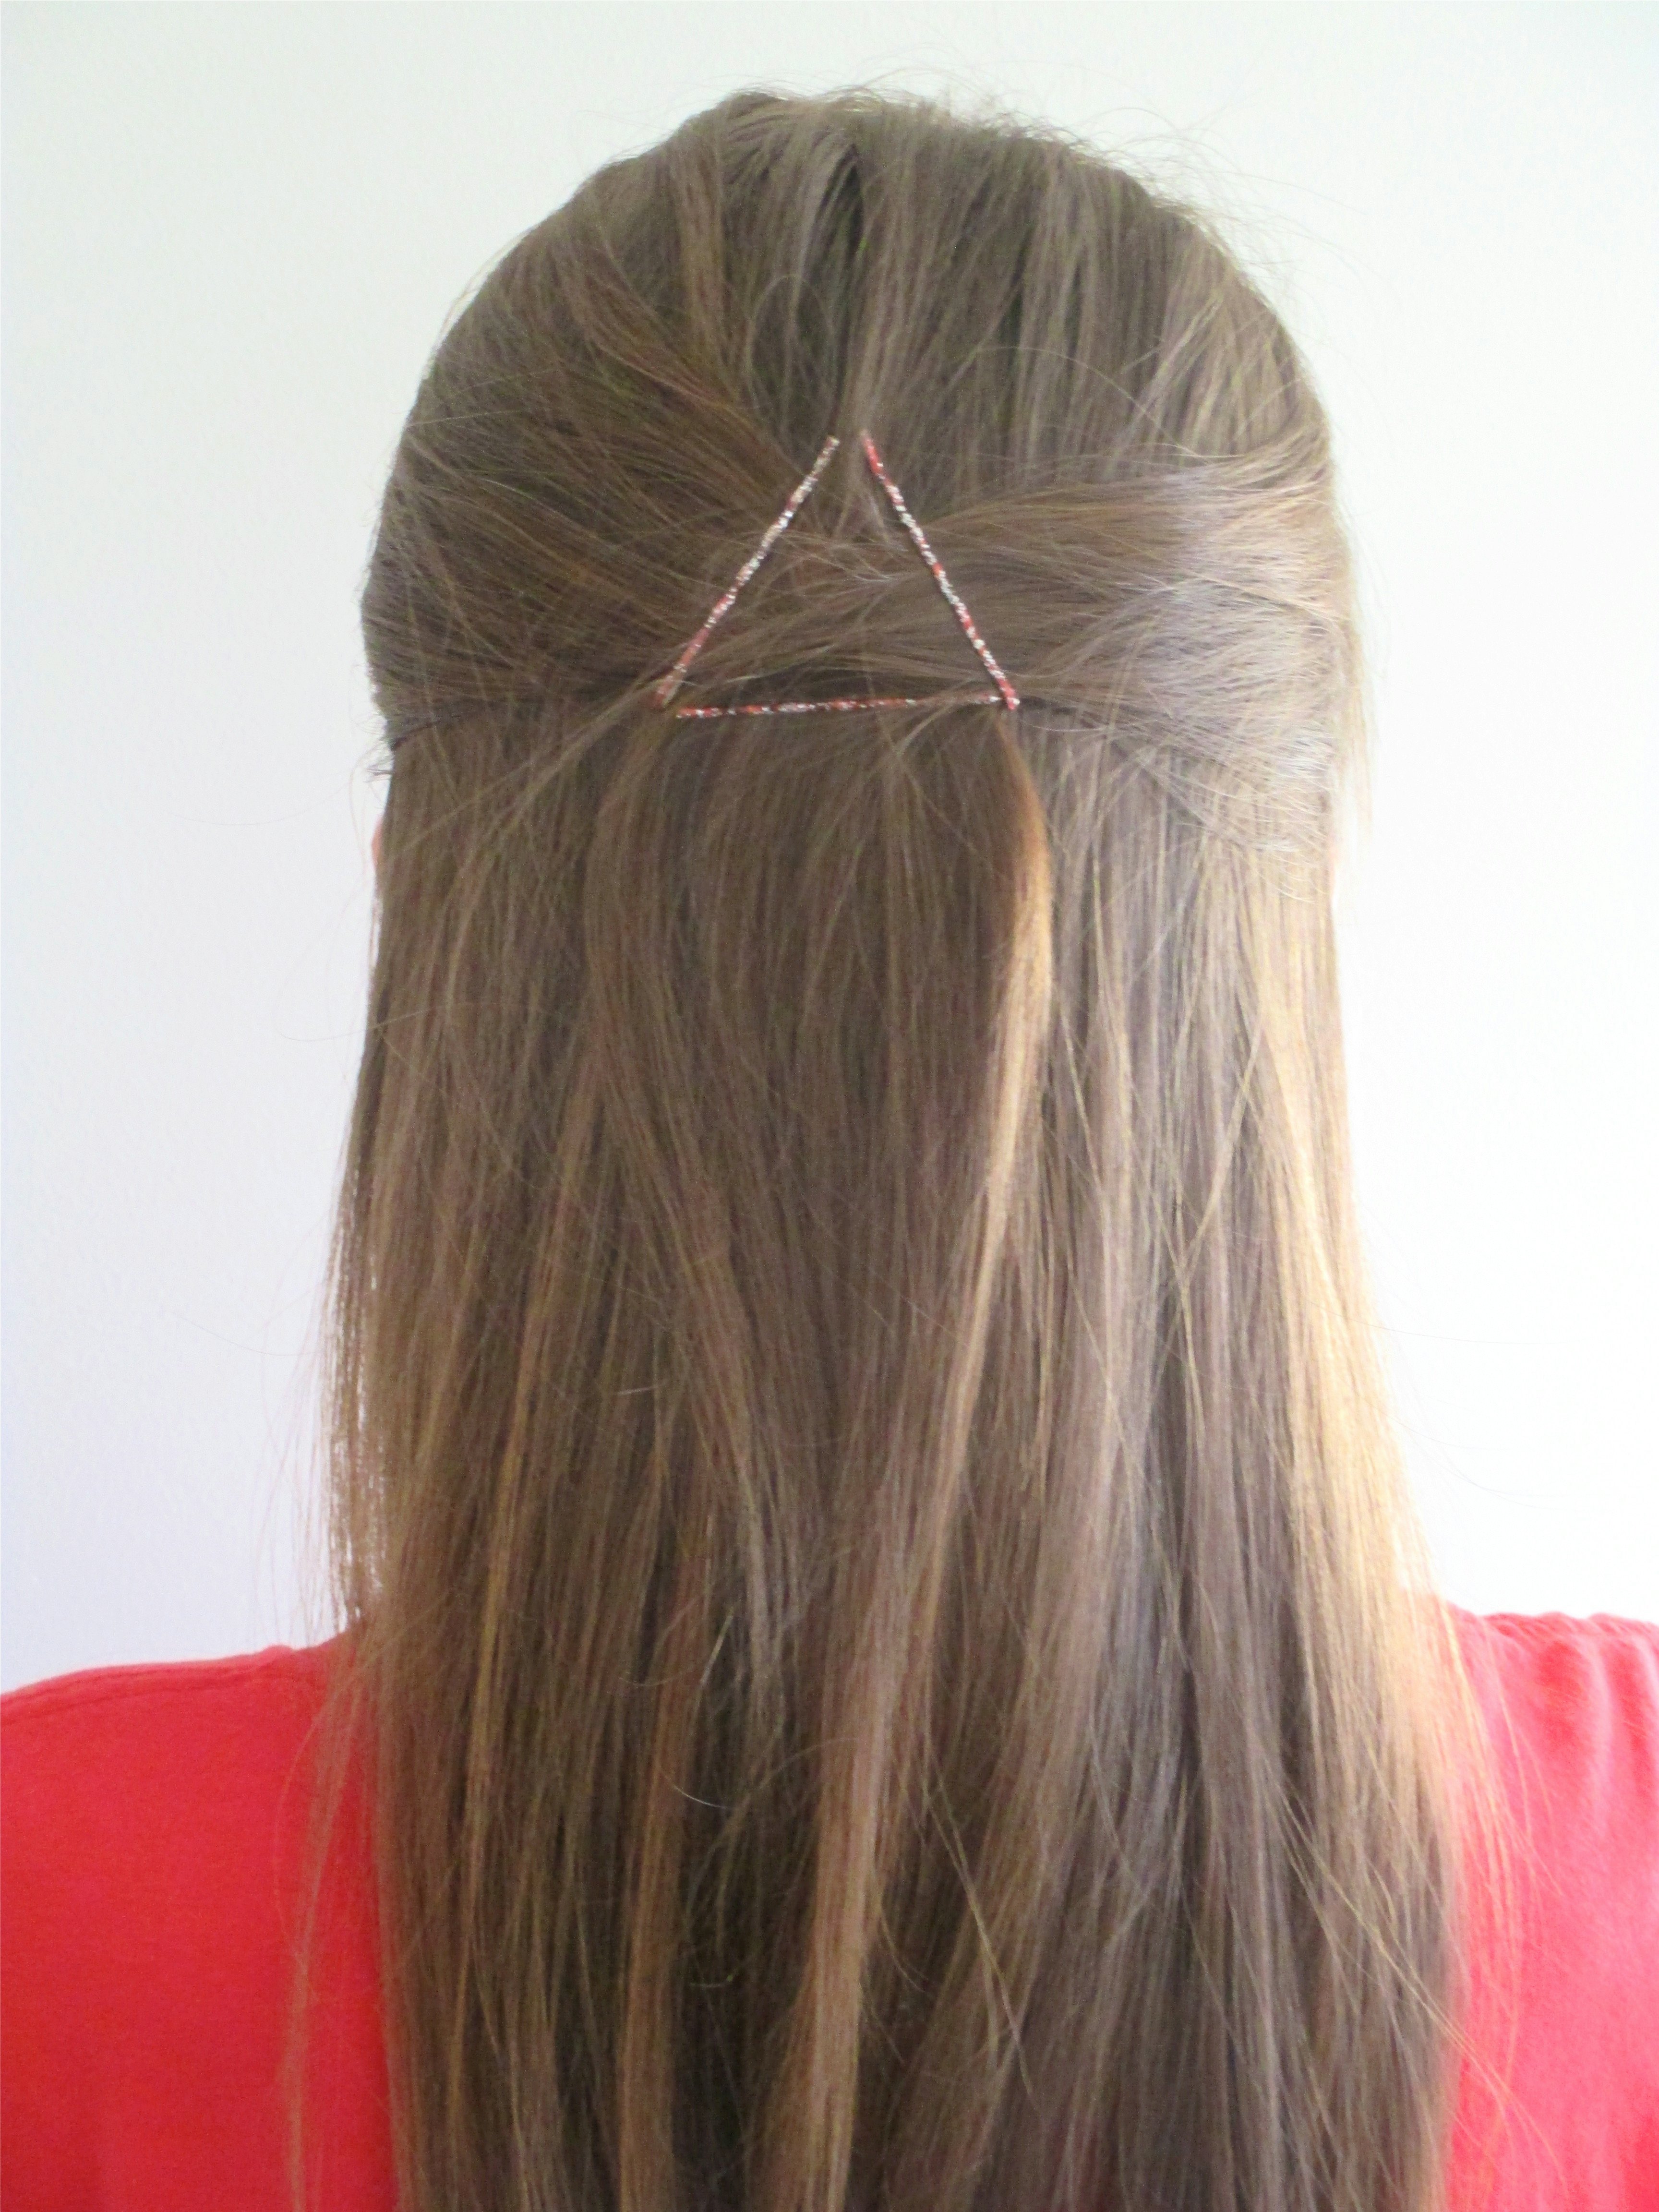 5 cute and easy bobby-pin hairstyles using fewer than 5